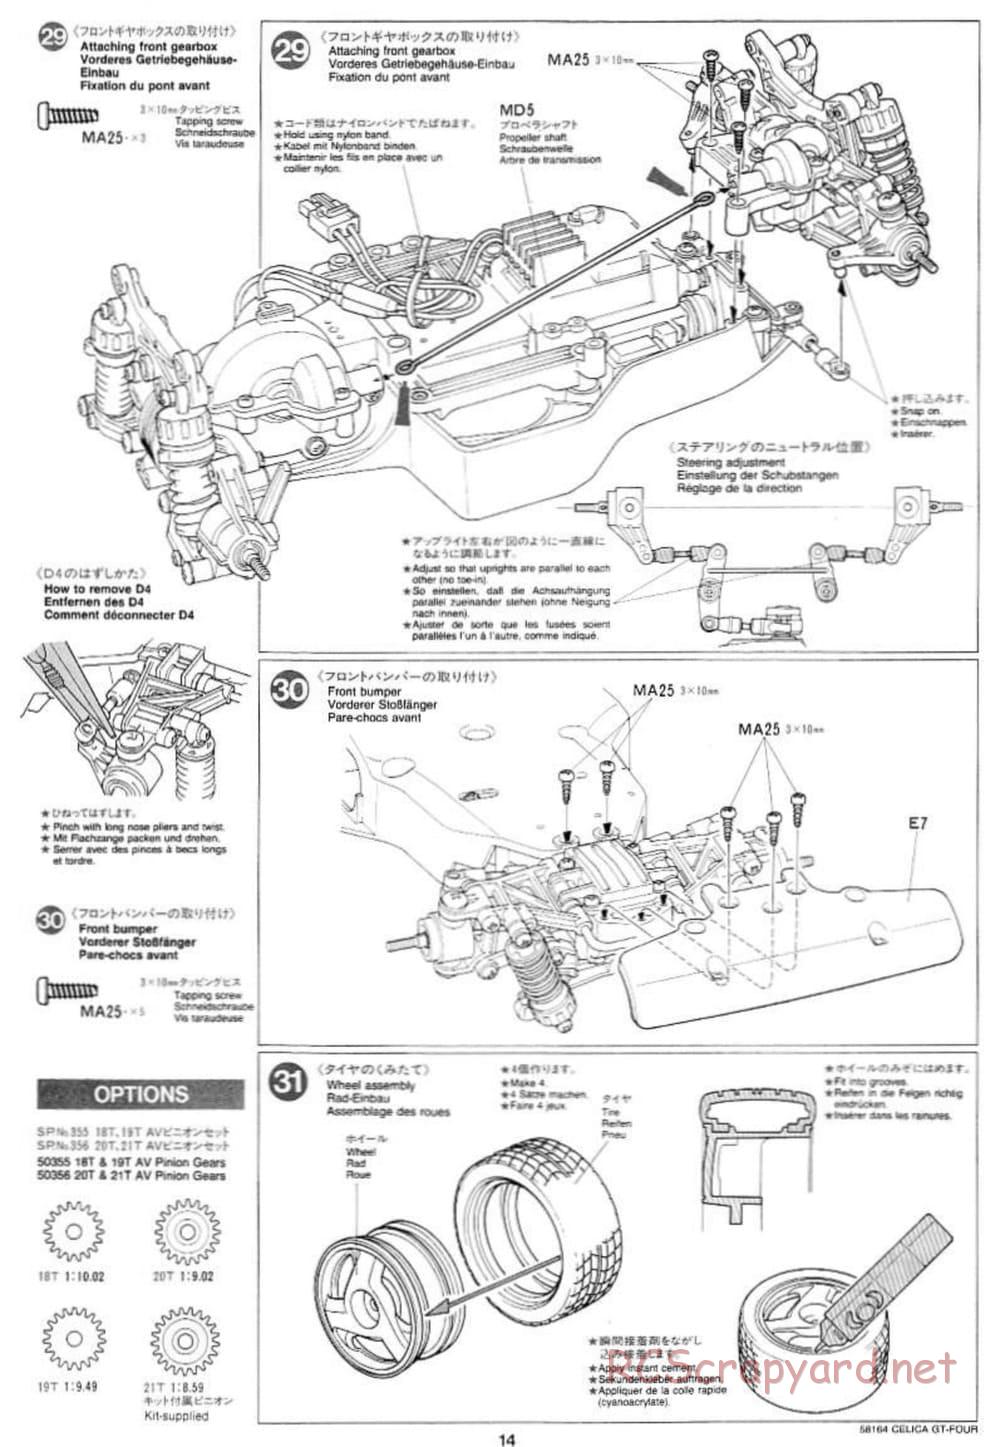 Tamiya - Toyota Celica GT Four - TA-02 Chassis - Manual - Page 14